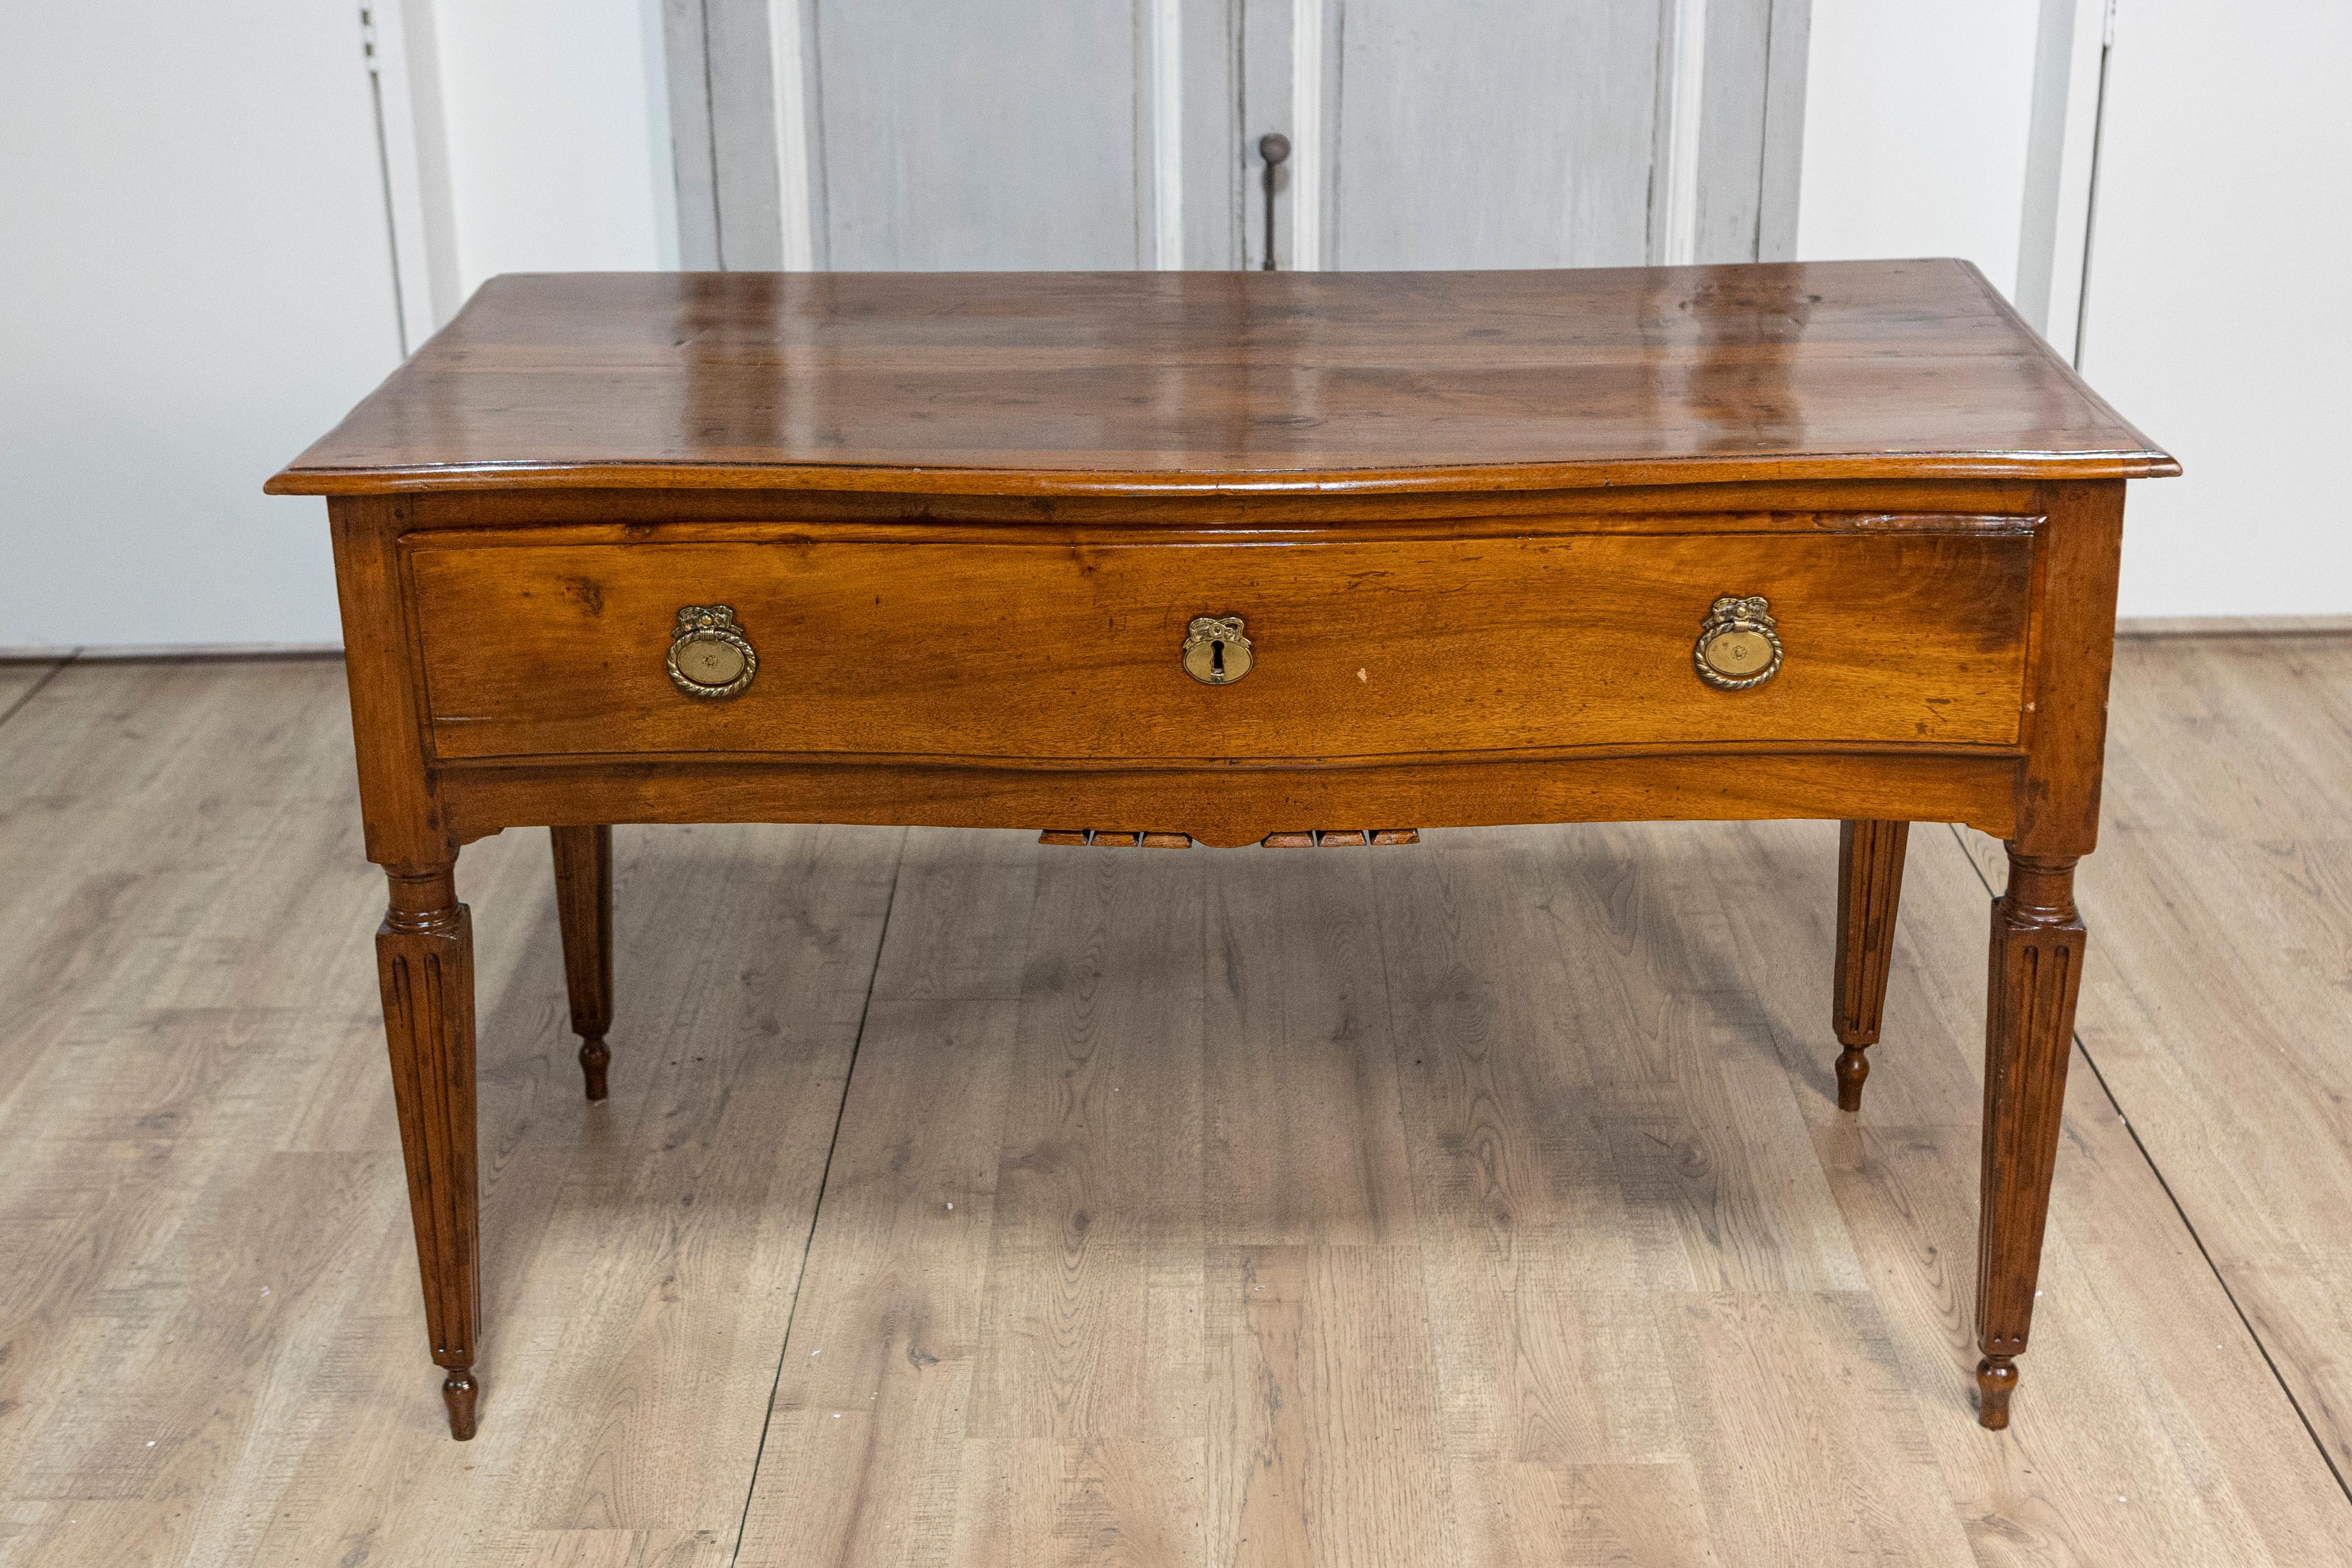 An Italian walnut console table from the 18th century with large drawer and tapered, fluted legs. This exquisite Italian walnut console table from the 18th century exudes timeless elegance and refined craftsmanship. The table features a large drawer